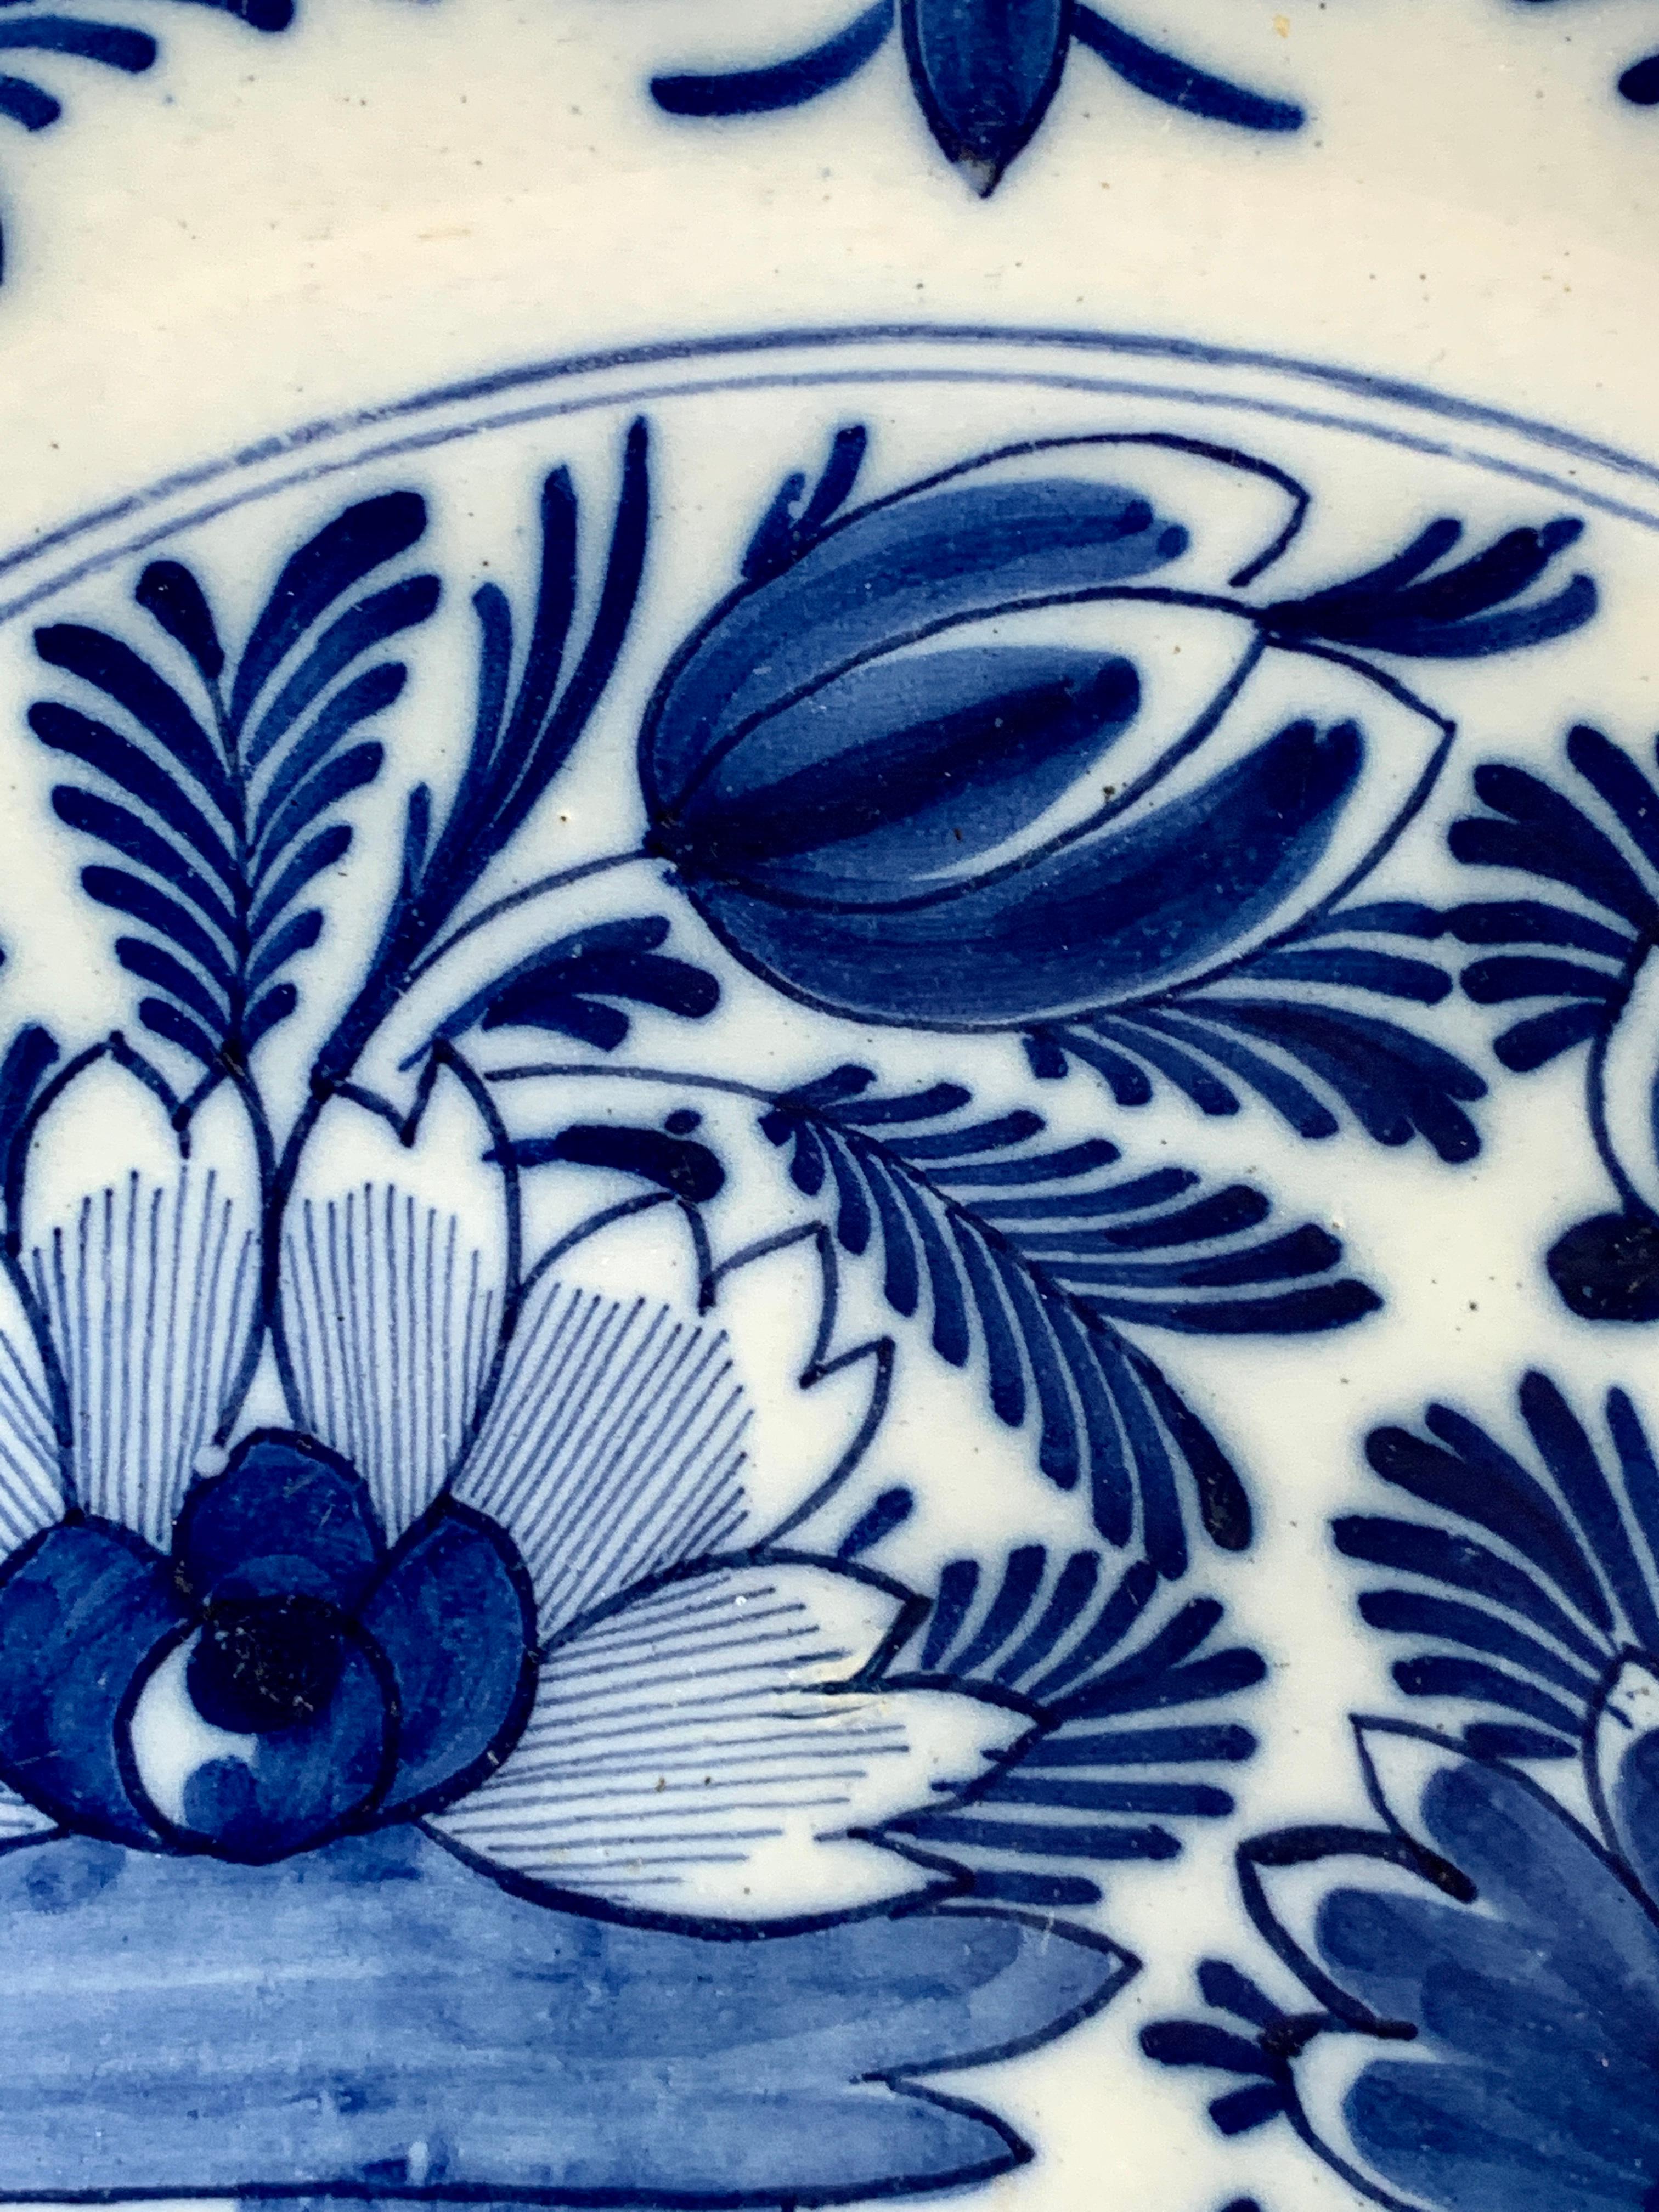 Hand-Painted Large Antique Blue and White Dutch Delft Charger Made, Circa 1800